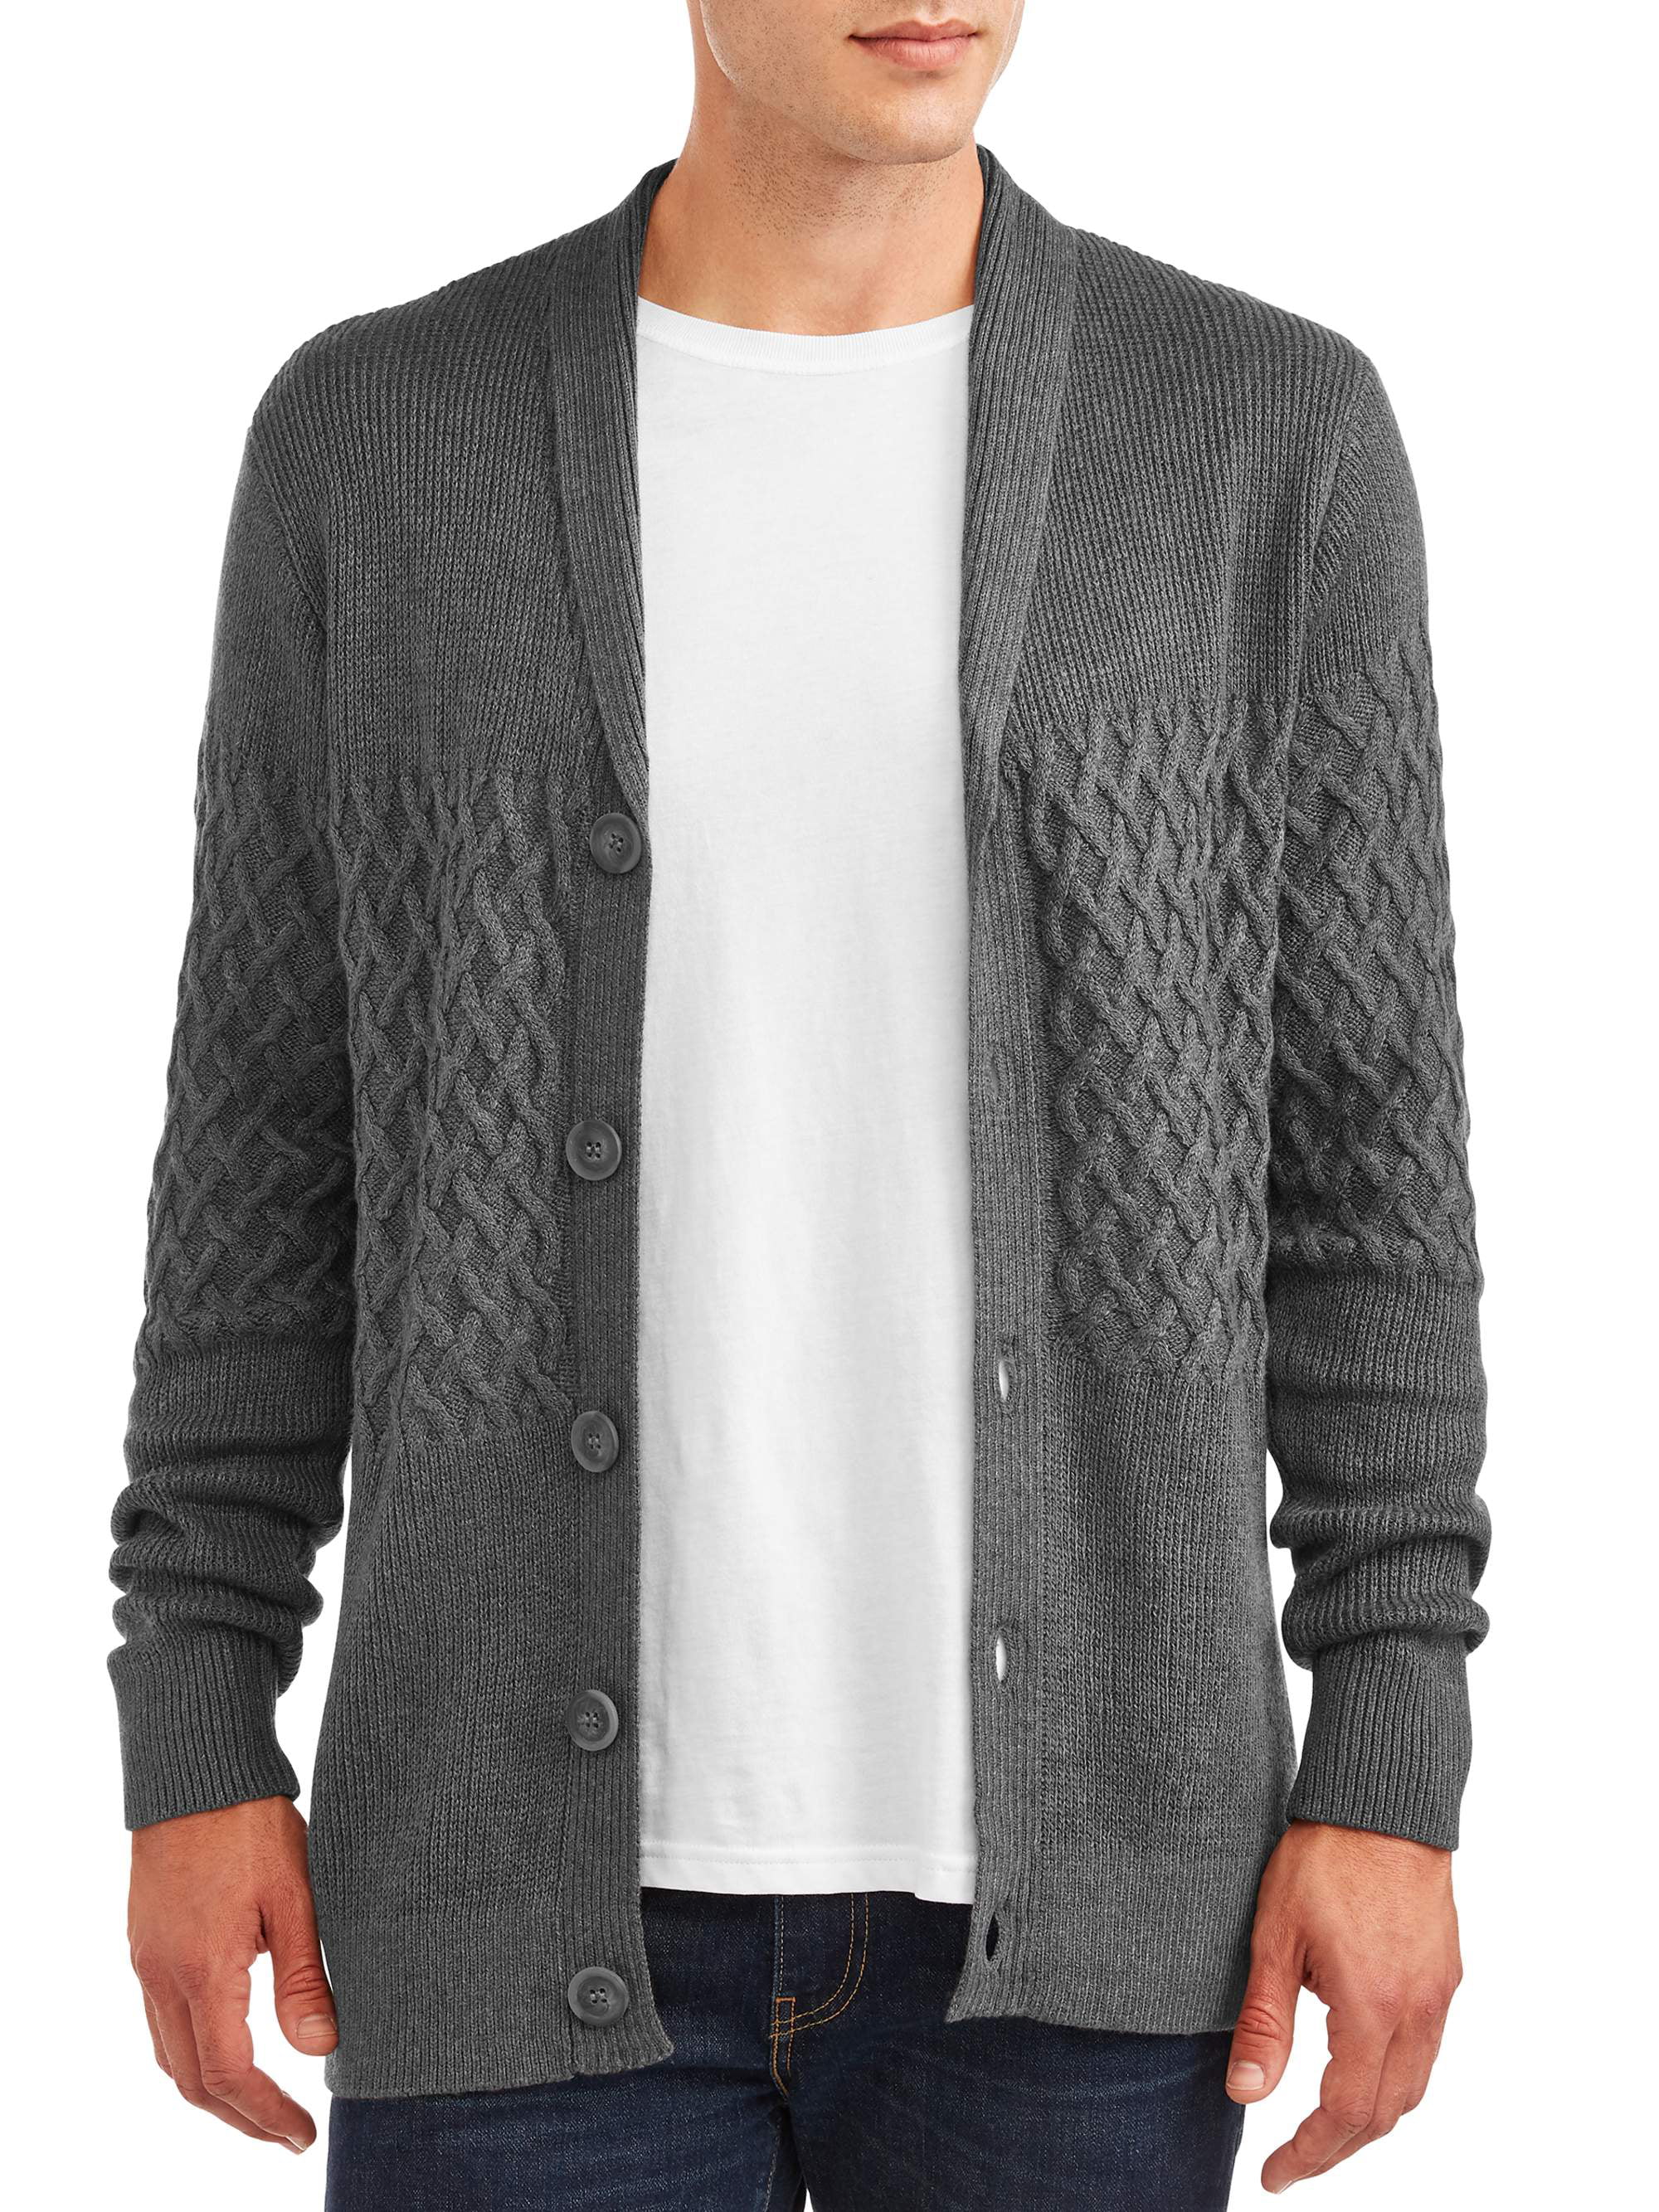 George - George Men's and Big Men's Cardigan Knit Sweater, up to Size ...